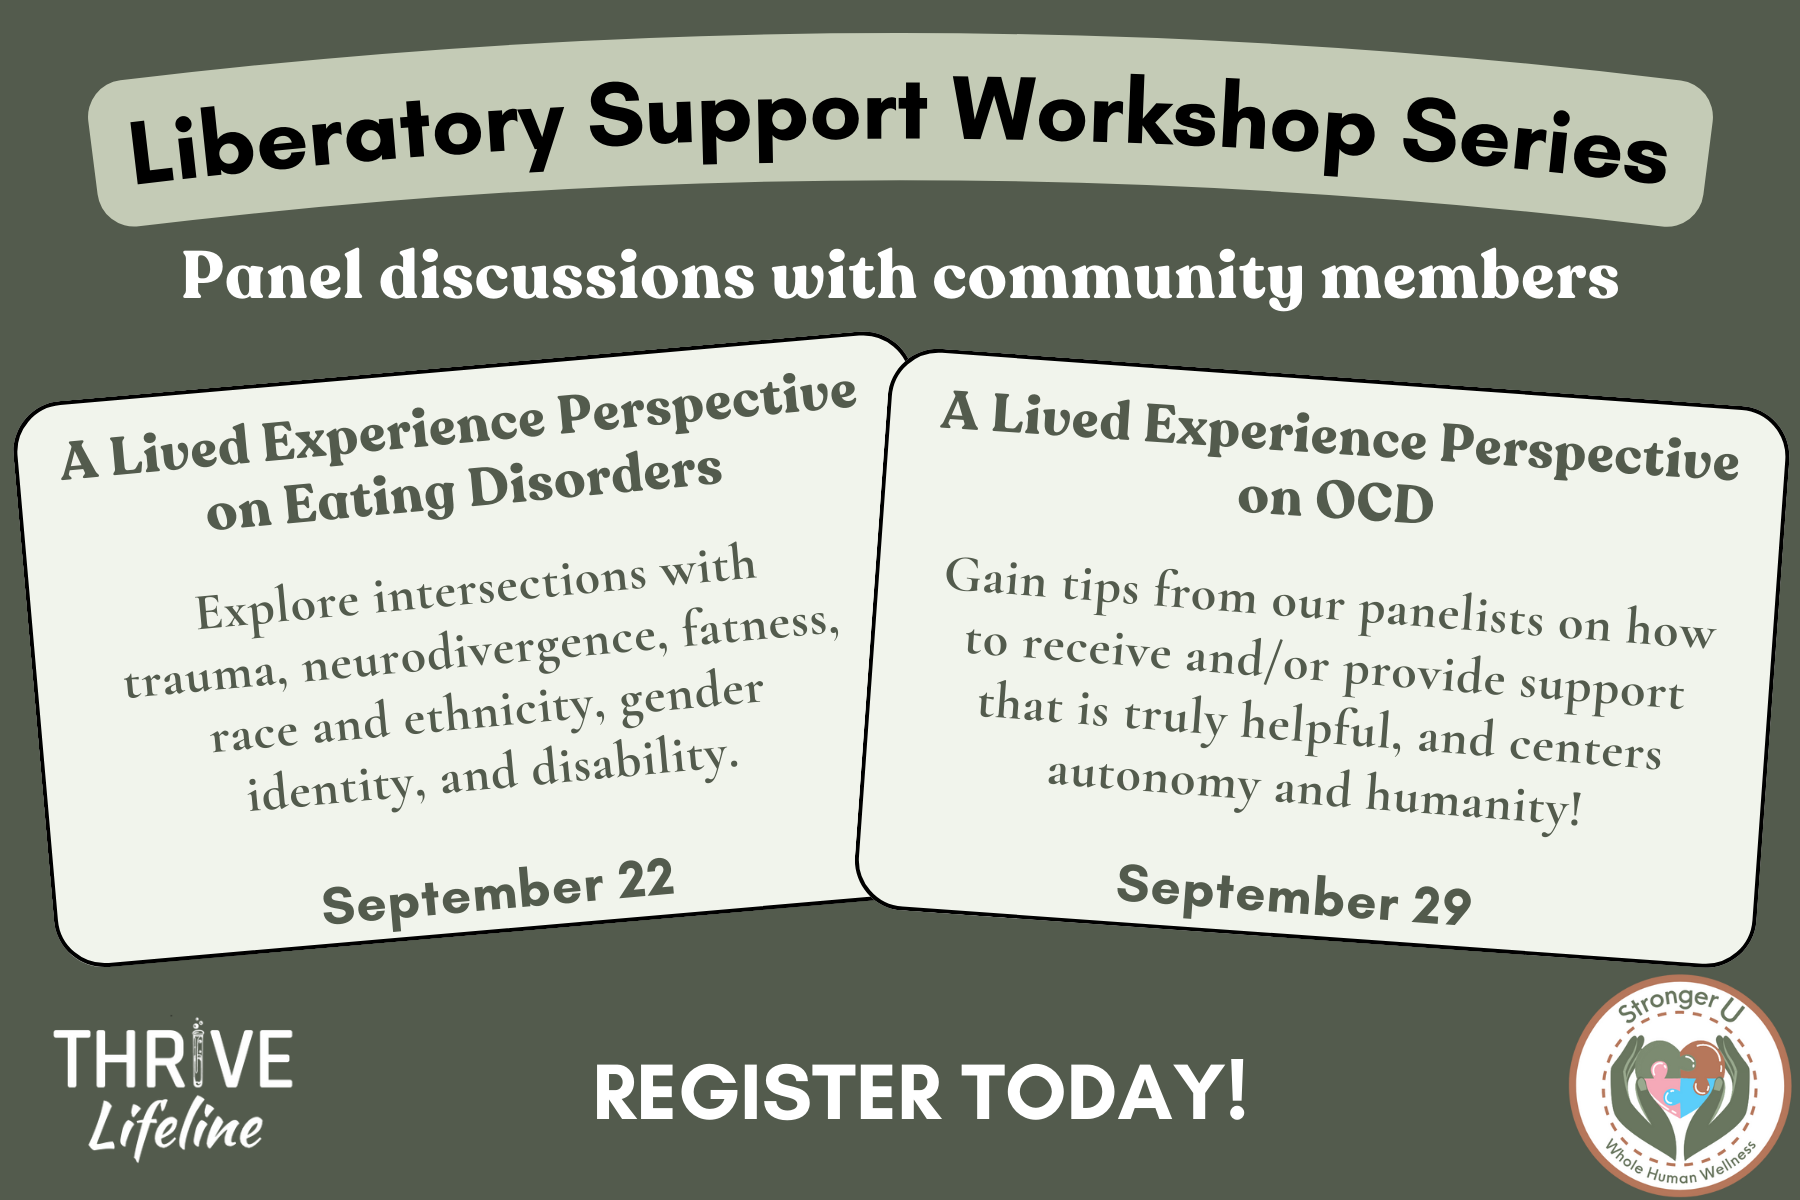 arc of text across the top reads Liberatory Support Workshop Series: panel discussions with community members. Below are two rectangles, one says A lived experience perspective on eating disorders: explore intersections with trauma, neurodivergence, fatness, race and ethnicity, gender identity, and disability: September 22. The other says A Lived Experience Perspective on OCD: Gain tips from our panelists on how to receive and/or provide support that is truly helpful, and centers autonomy and humanity! September 29. Below it says Register Today. Colors are various shades of greens.